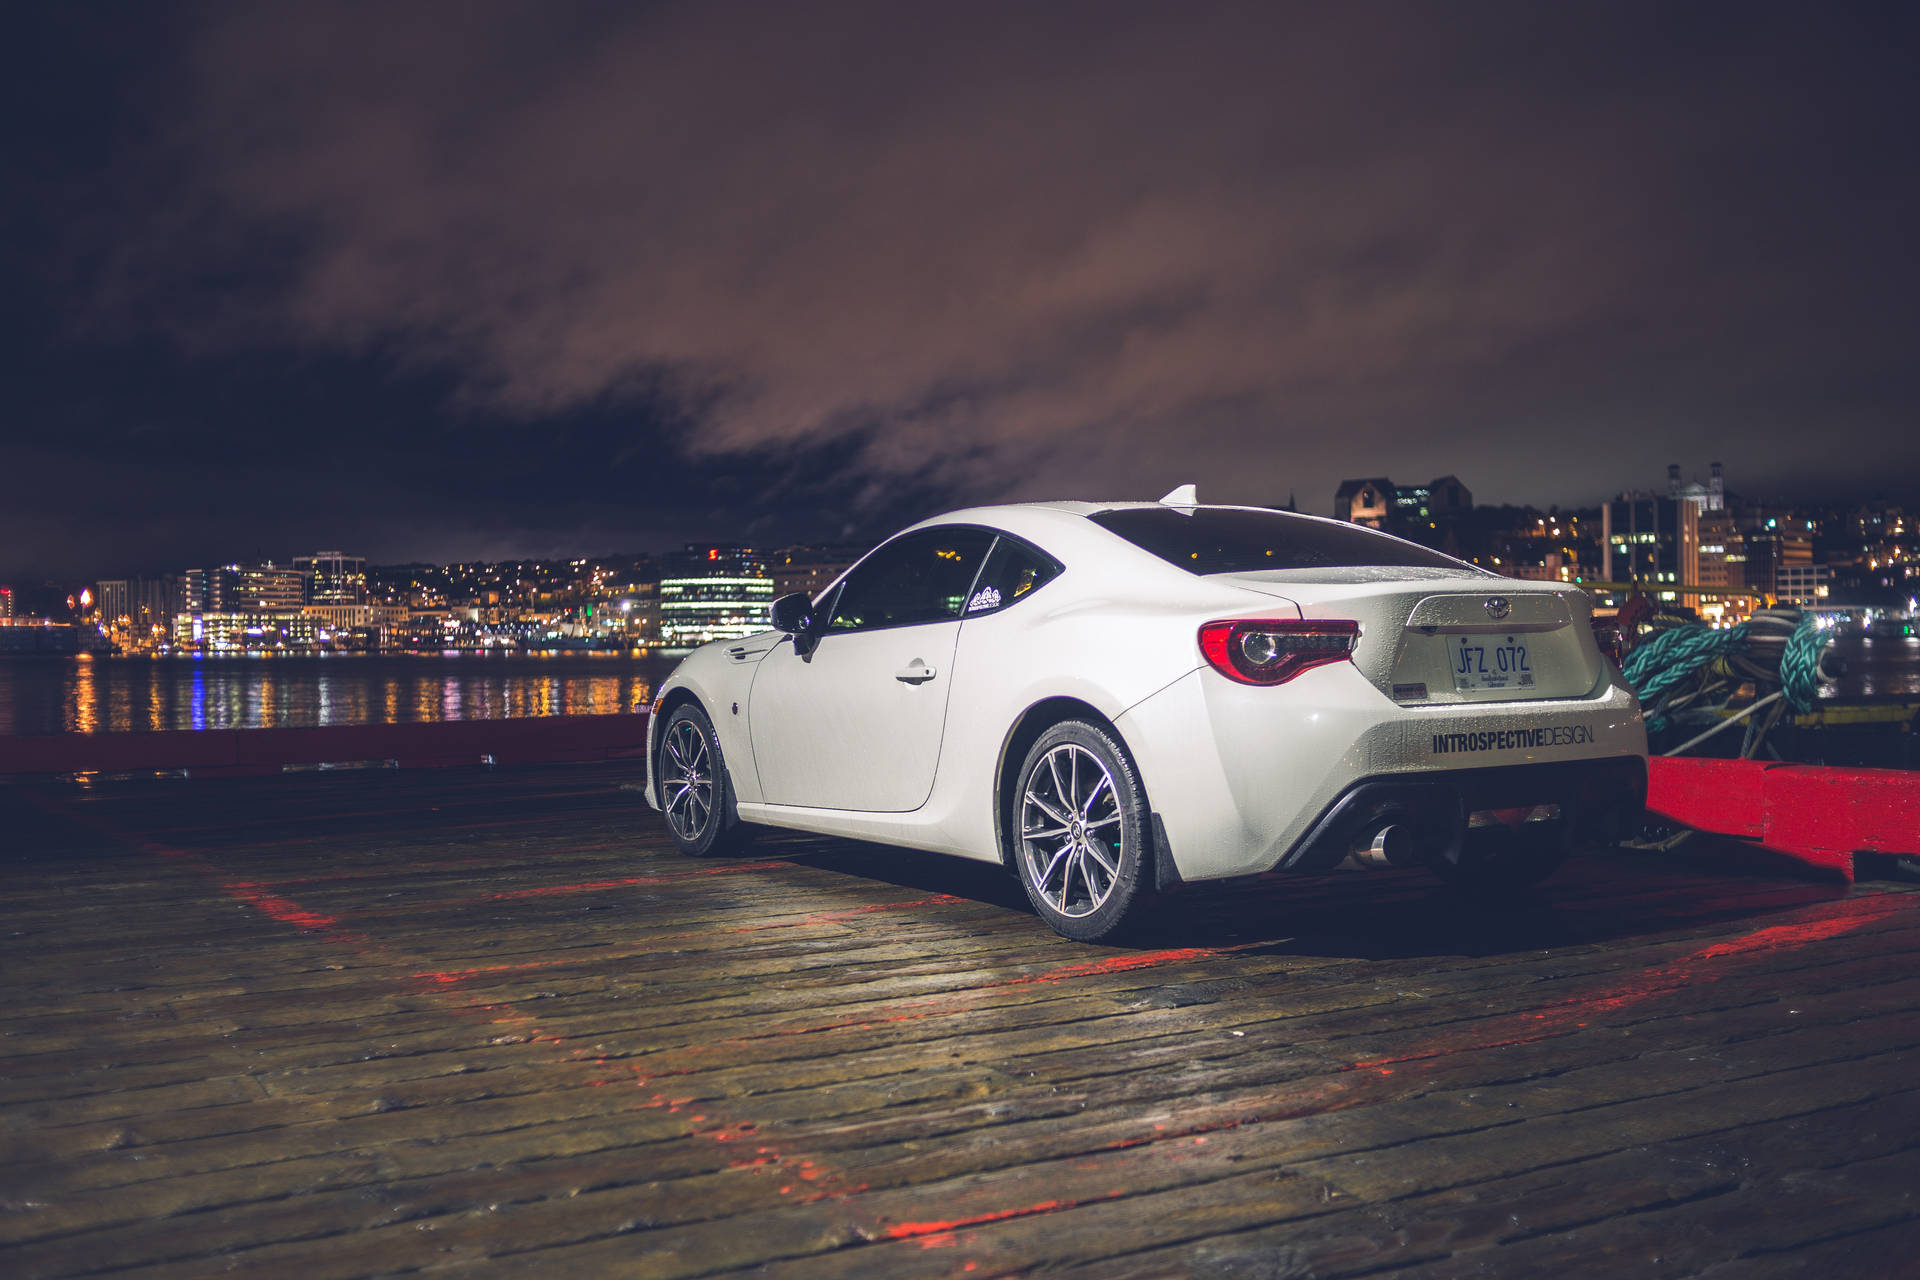 Toyota Car In Pier At Night Background